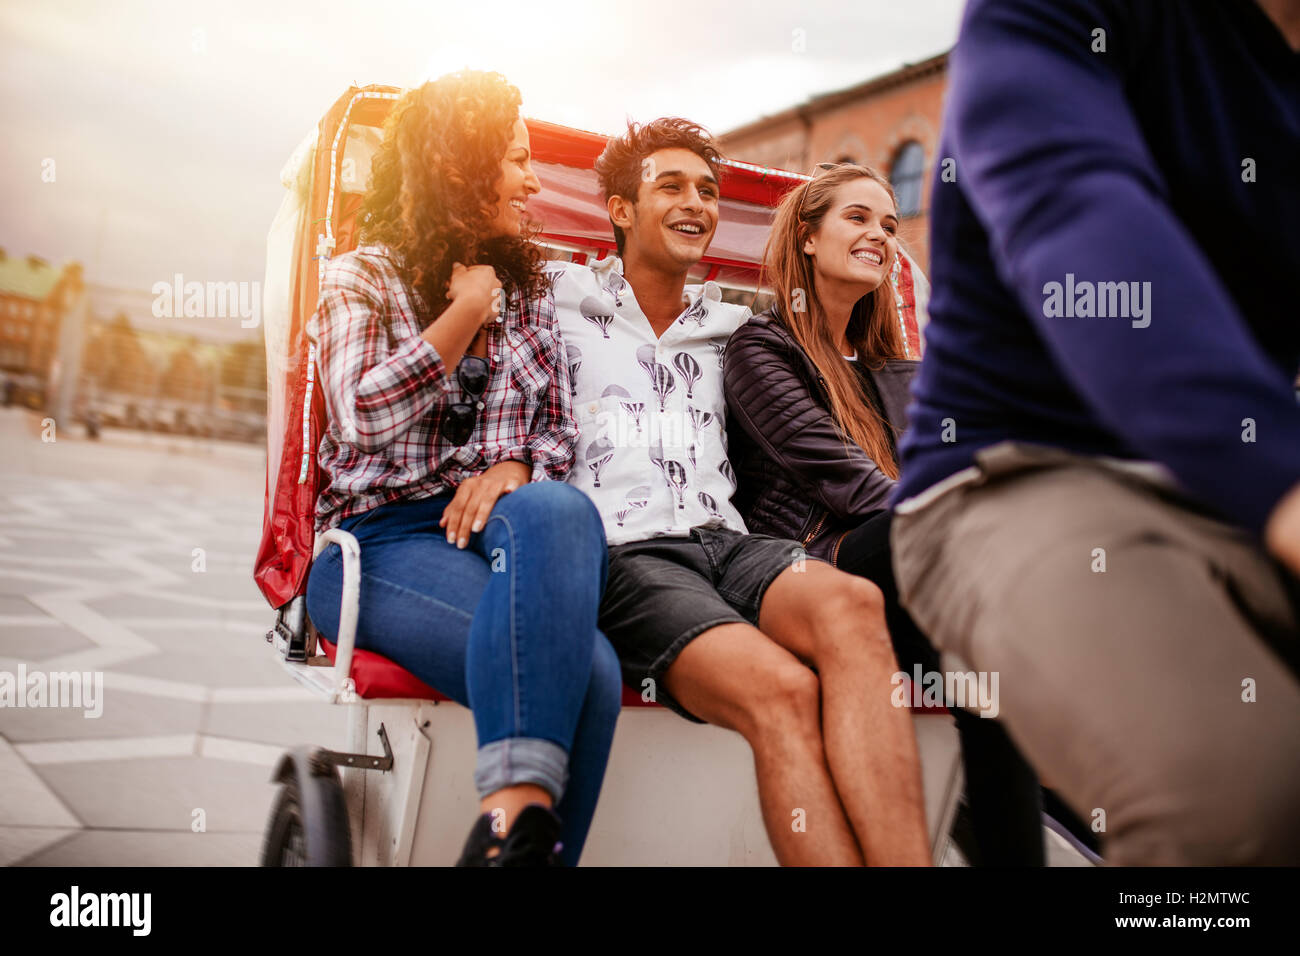 Group of young friends enjoying tricycle ride. Teenagers riding on tricycle on city road. Stock Photo